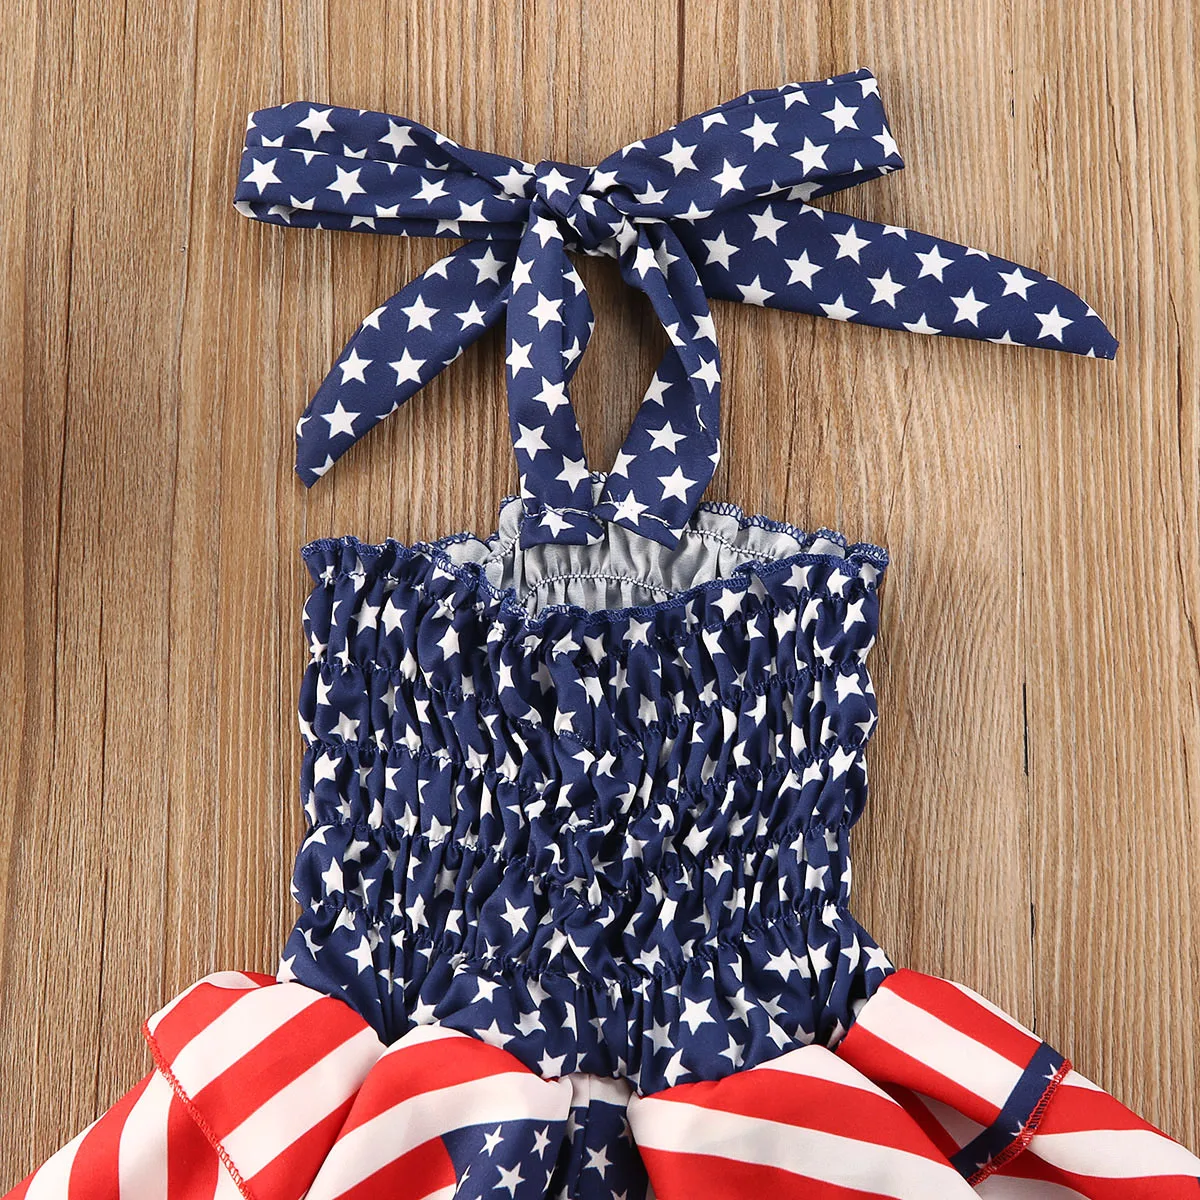 Ruffle Dress Independence Day Outfit Toddler Baby Girls 4th of July American Flag Stripe Stars Print Halter Suspender Kids Dress enlarge